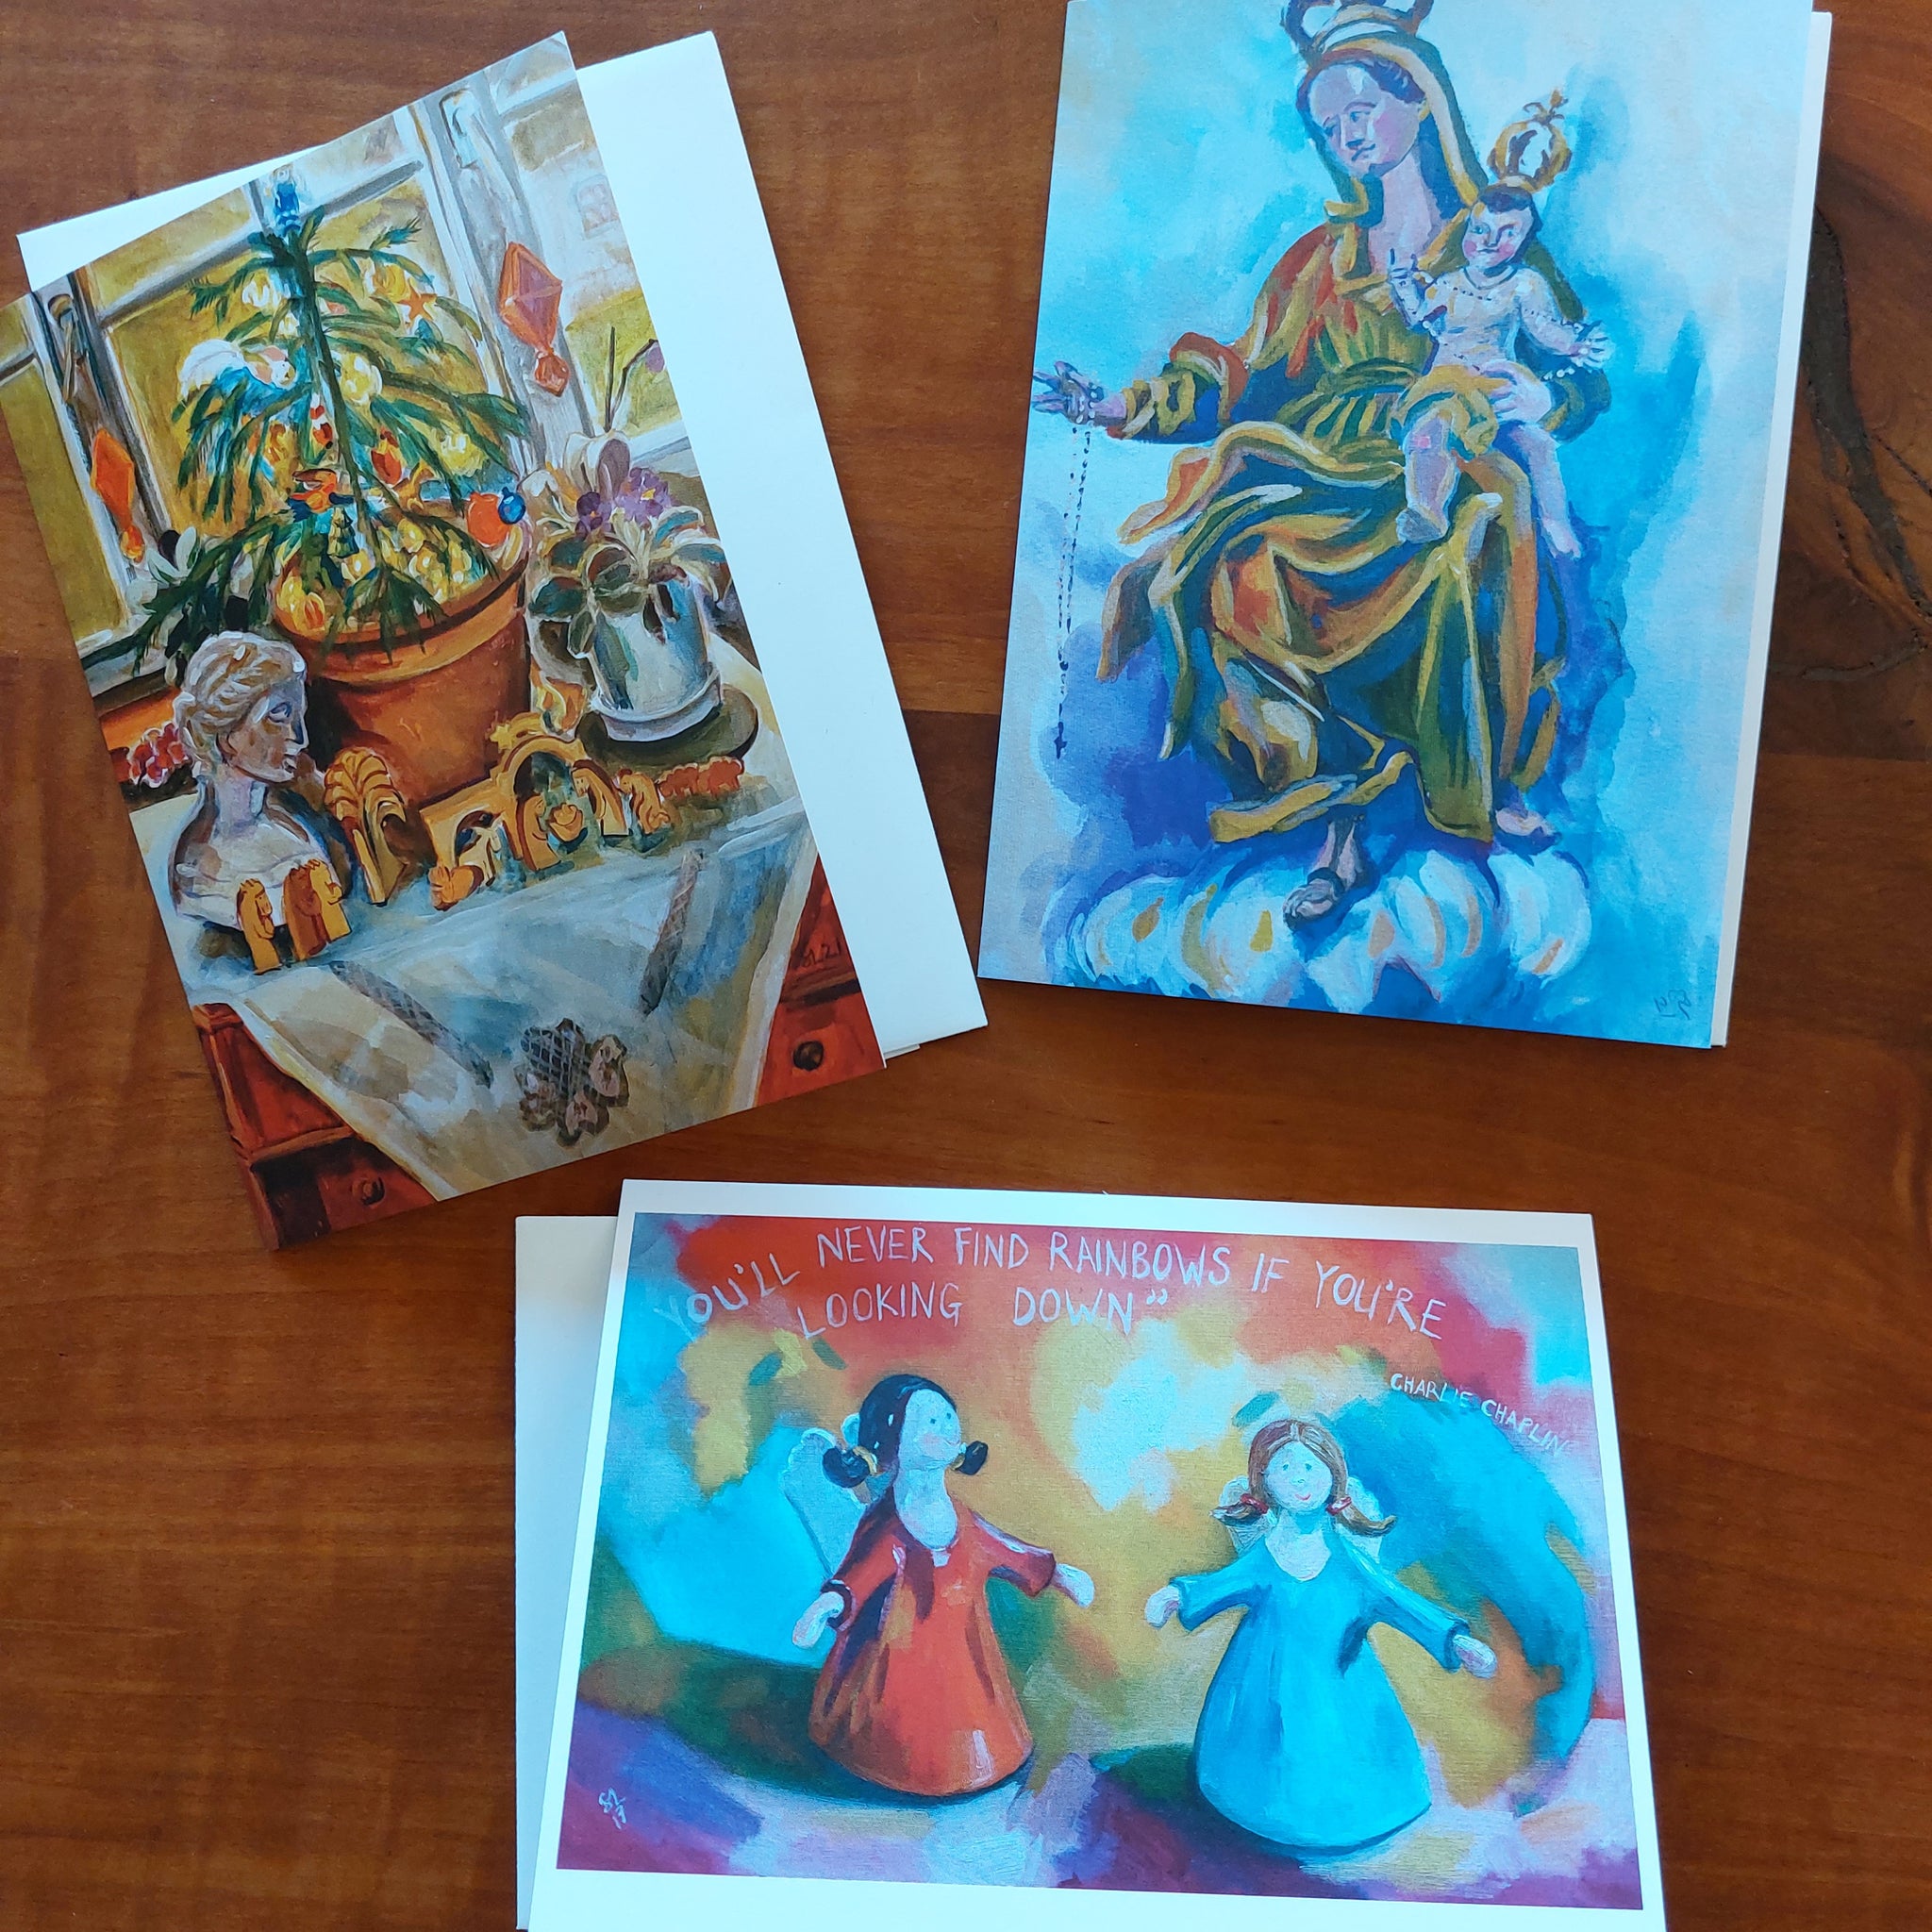 Christmas cards, set of 3: Christian images II